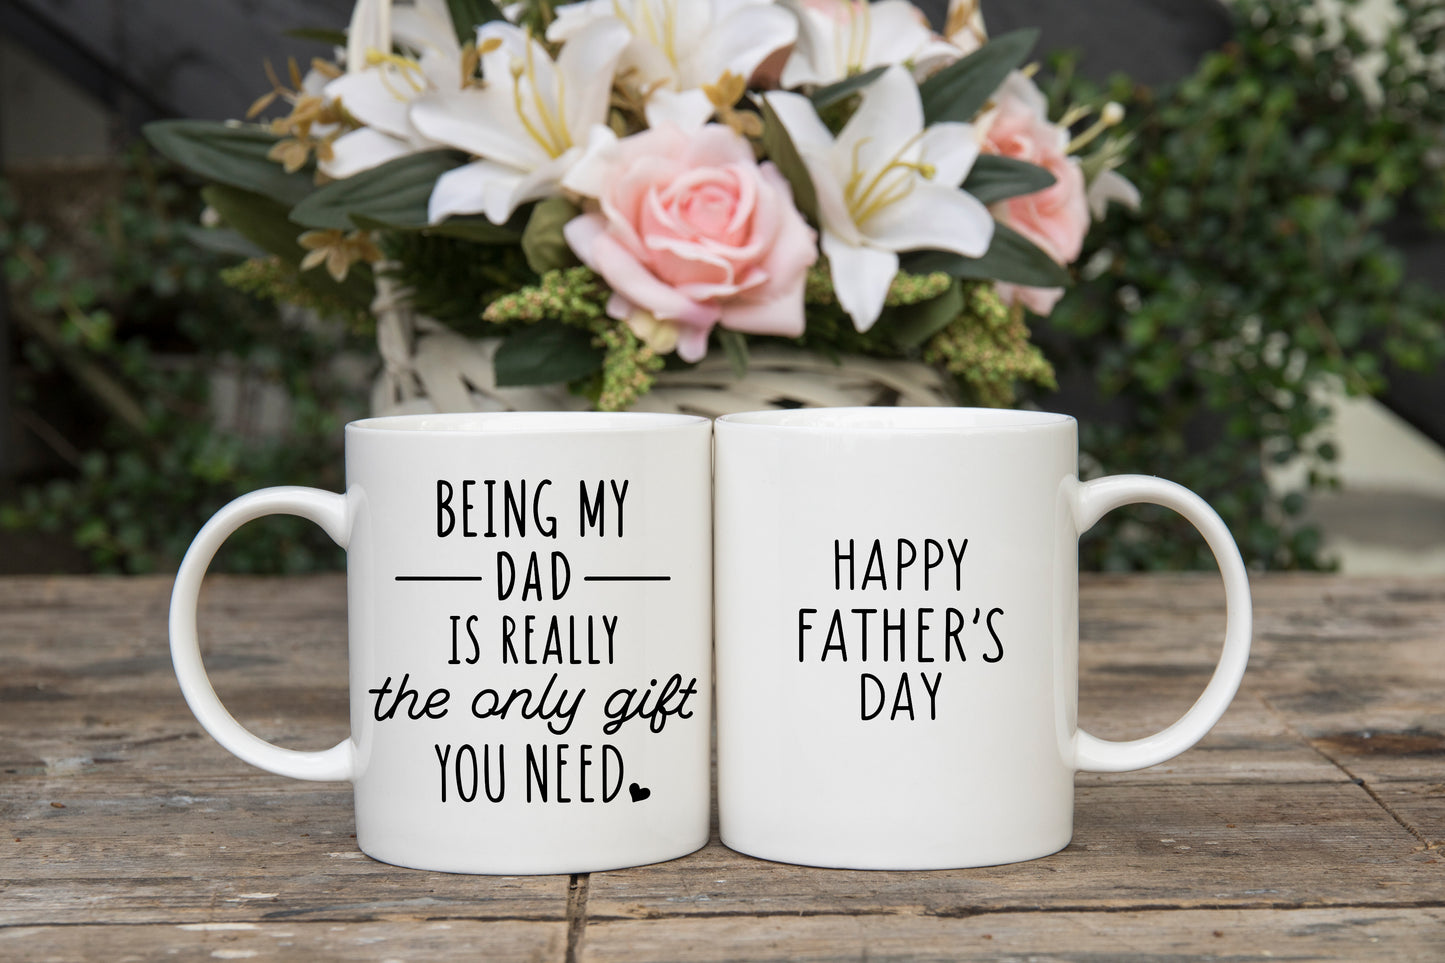 Being my Dad is the only gift you need mug